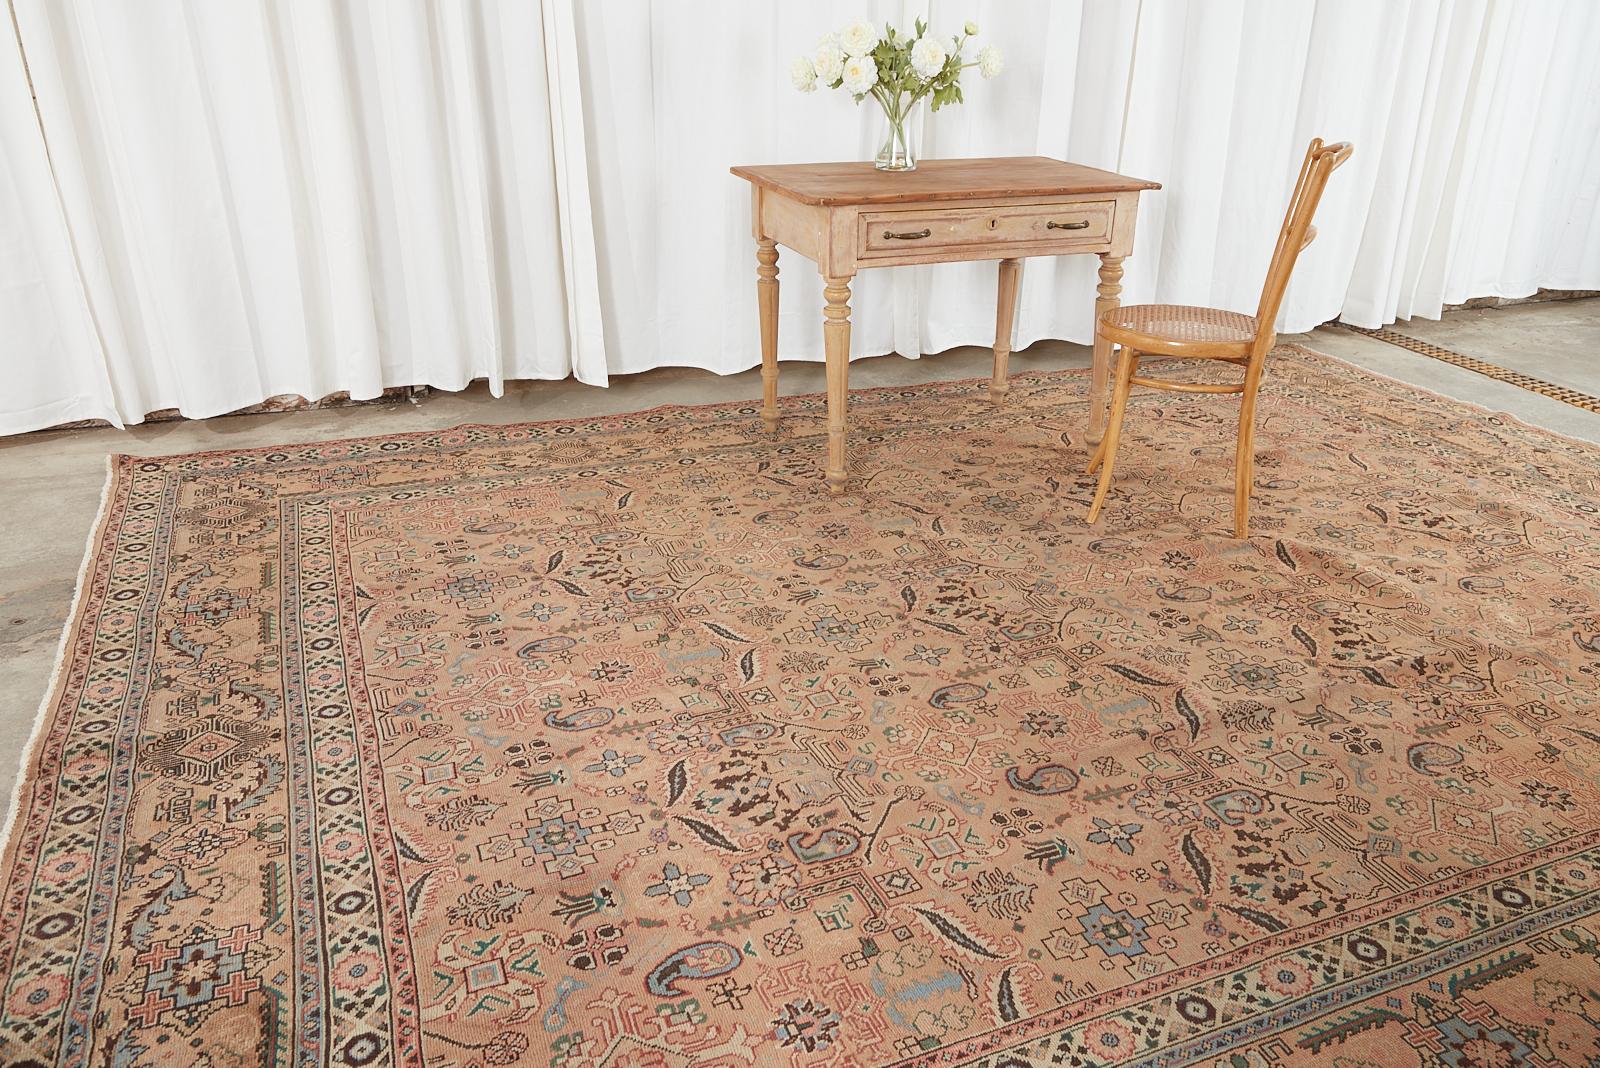 Mesmerizing semi-antique Persian hand-knotted wool Tabriz rug made in the decorative art nouveau taste. The rug features natural foliate designs with sinuous patterns and floral sprays over a rose taupe ground. Beautifully crafted with vibrant